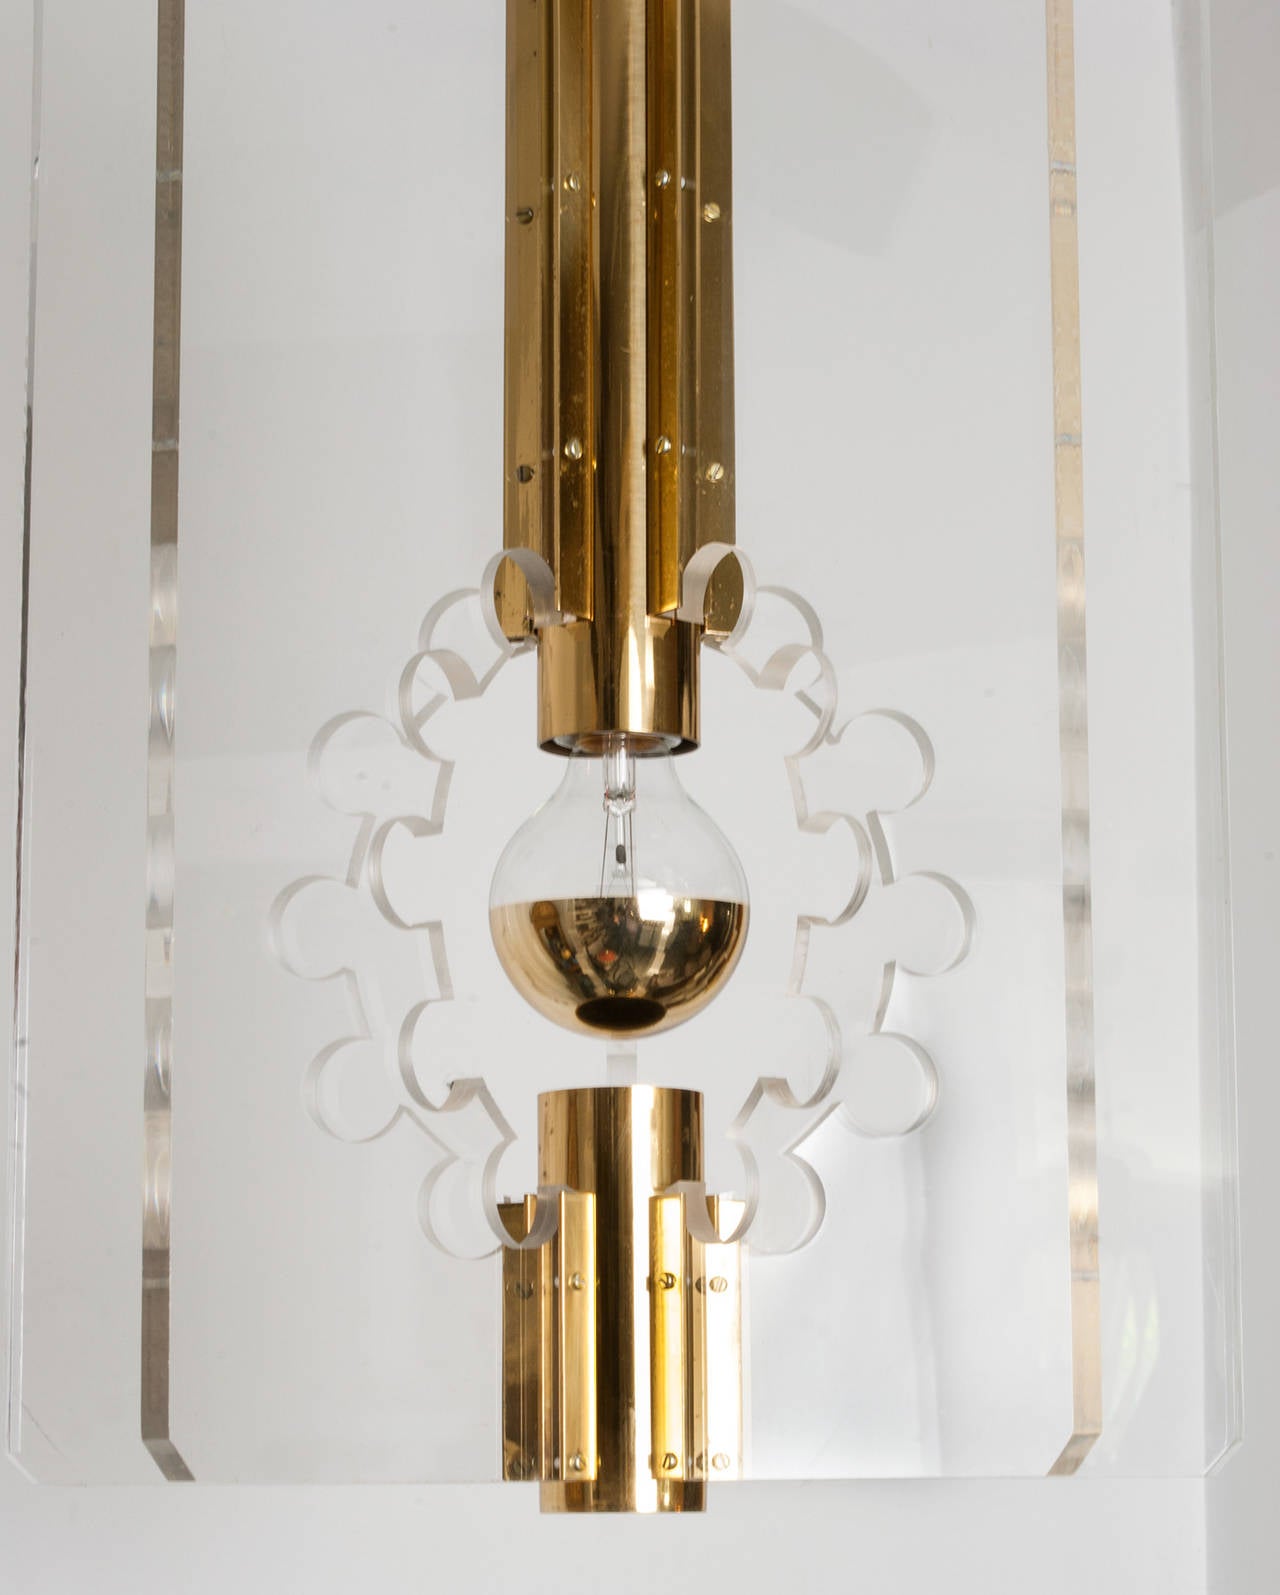 20th Century Swedish Lucite and Brass Lantern Pendant by Hans-Agne Jakobsson for Markaryd